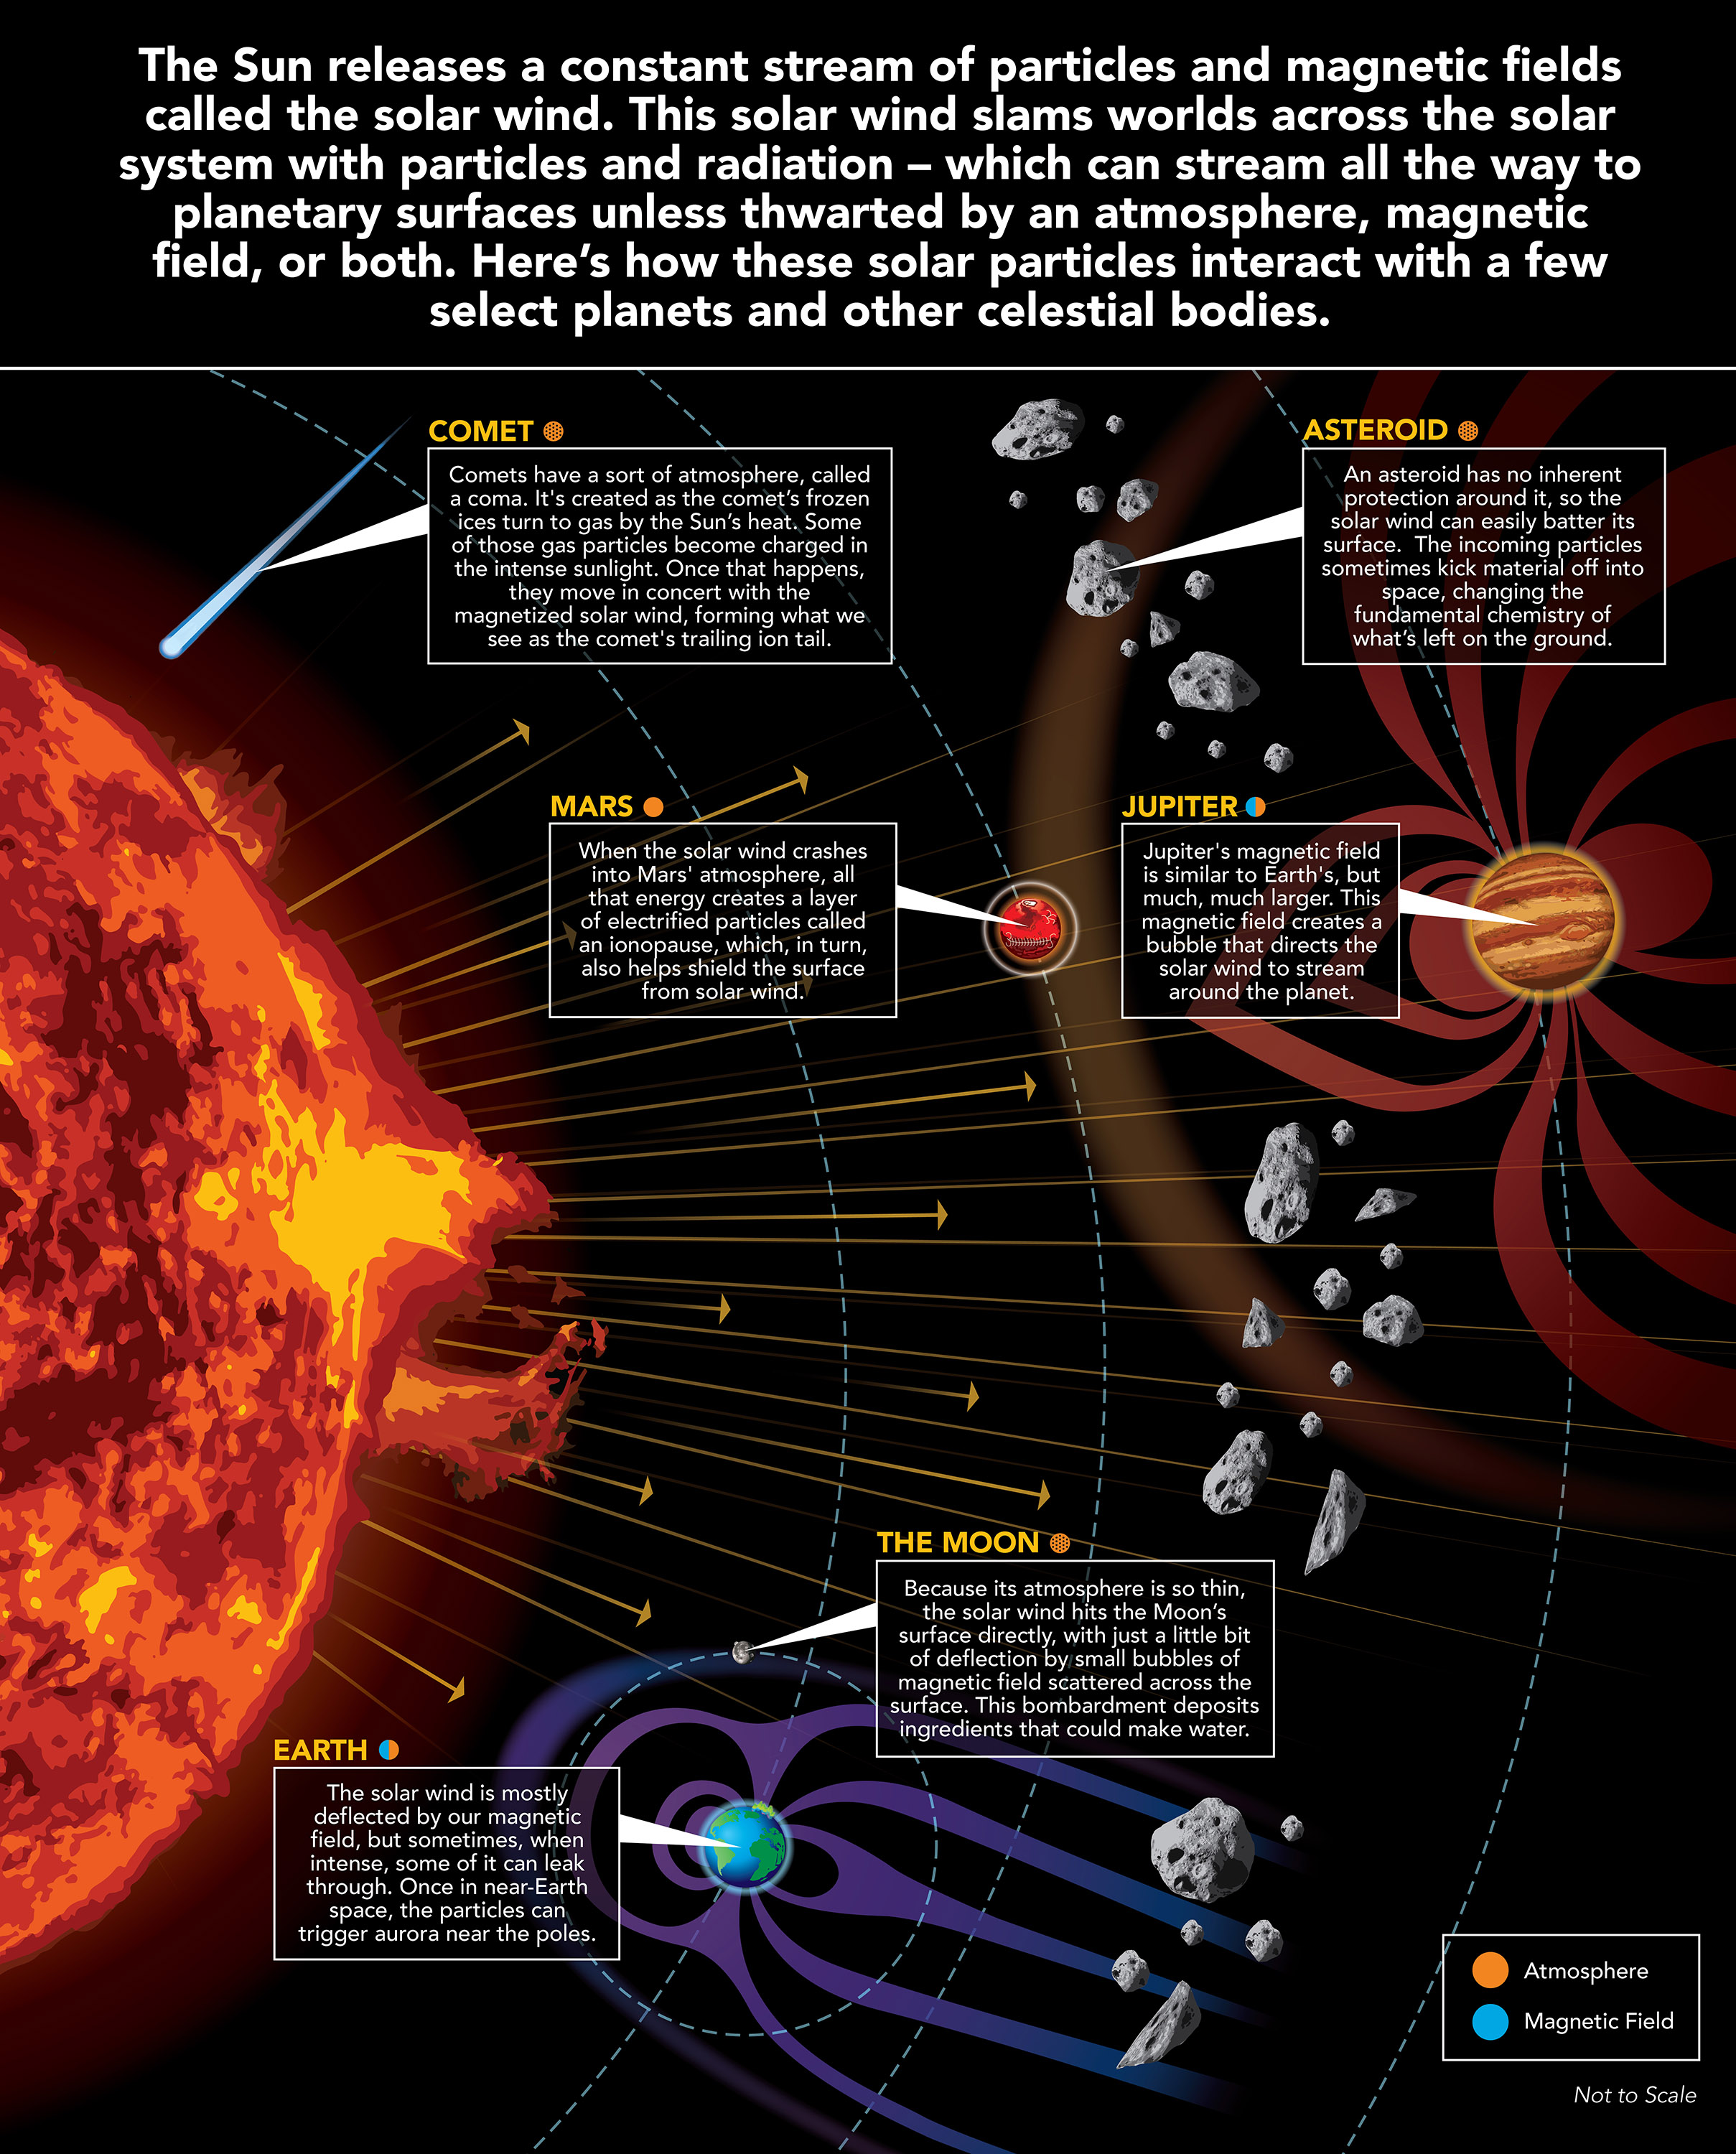 Illustration showing how particles from the Sun interact with planets.